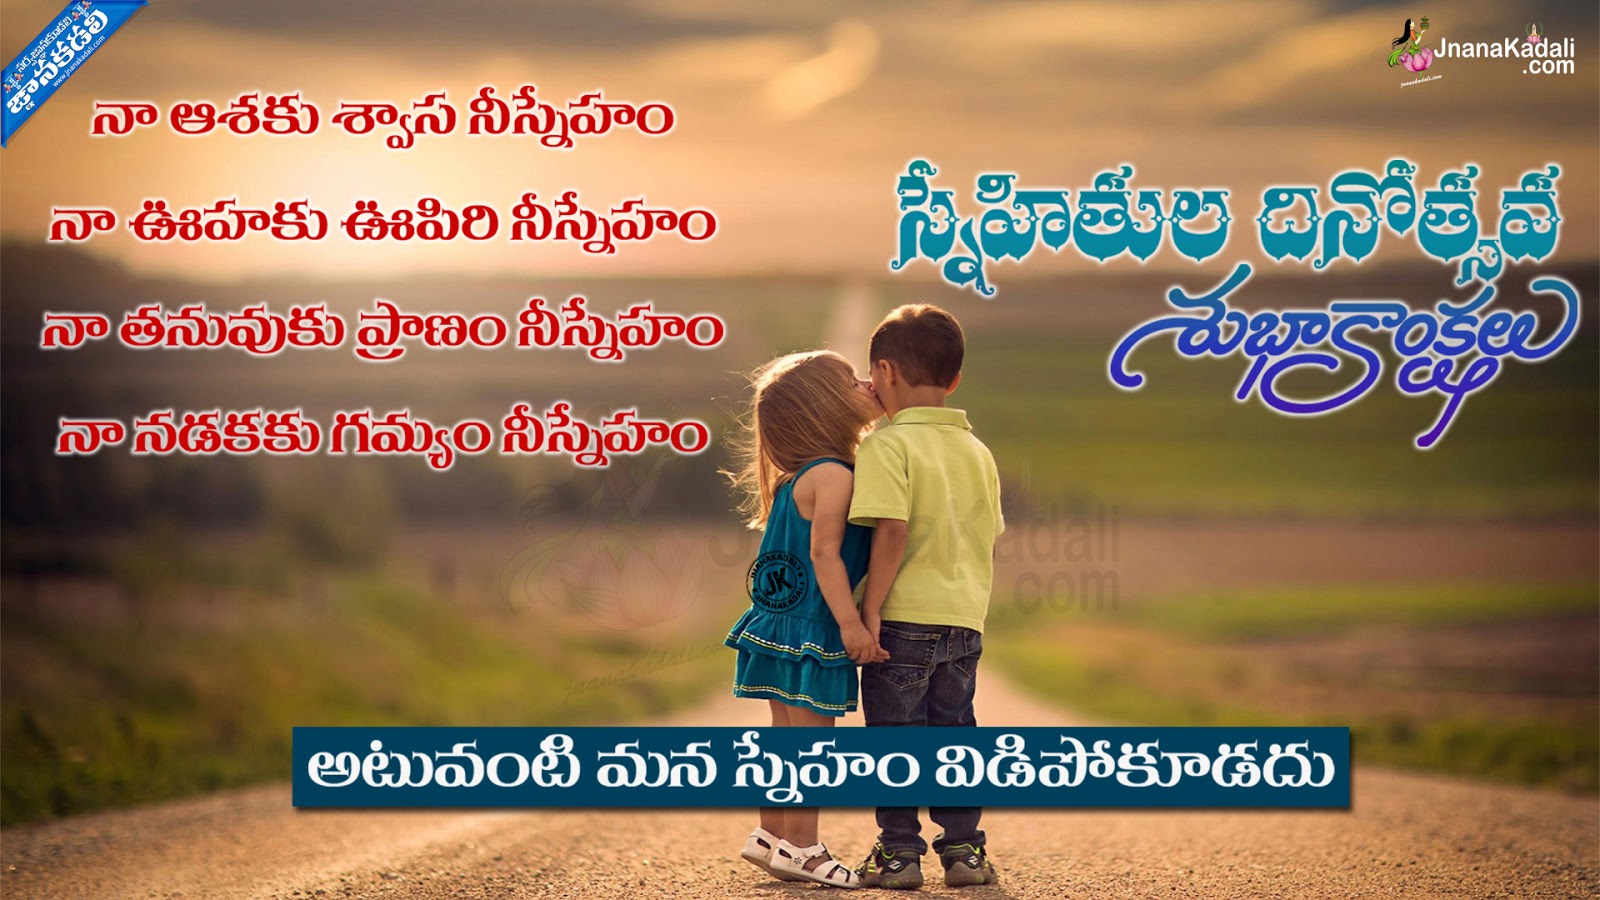 Friendship day telugu quotes with hd wallpapers International ...